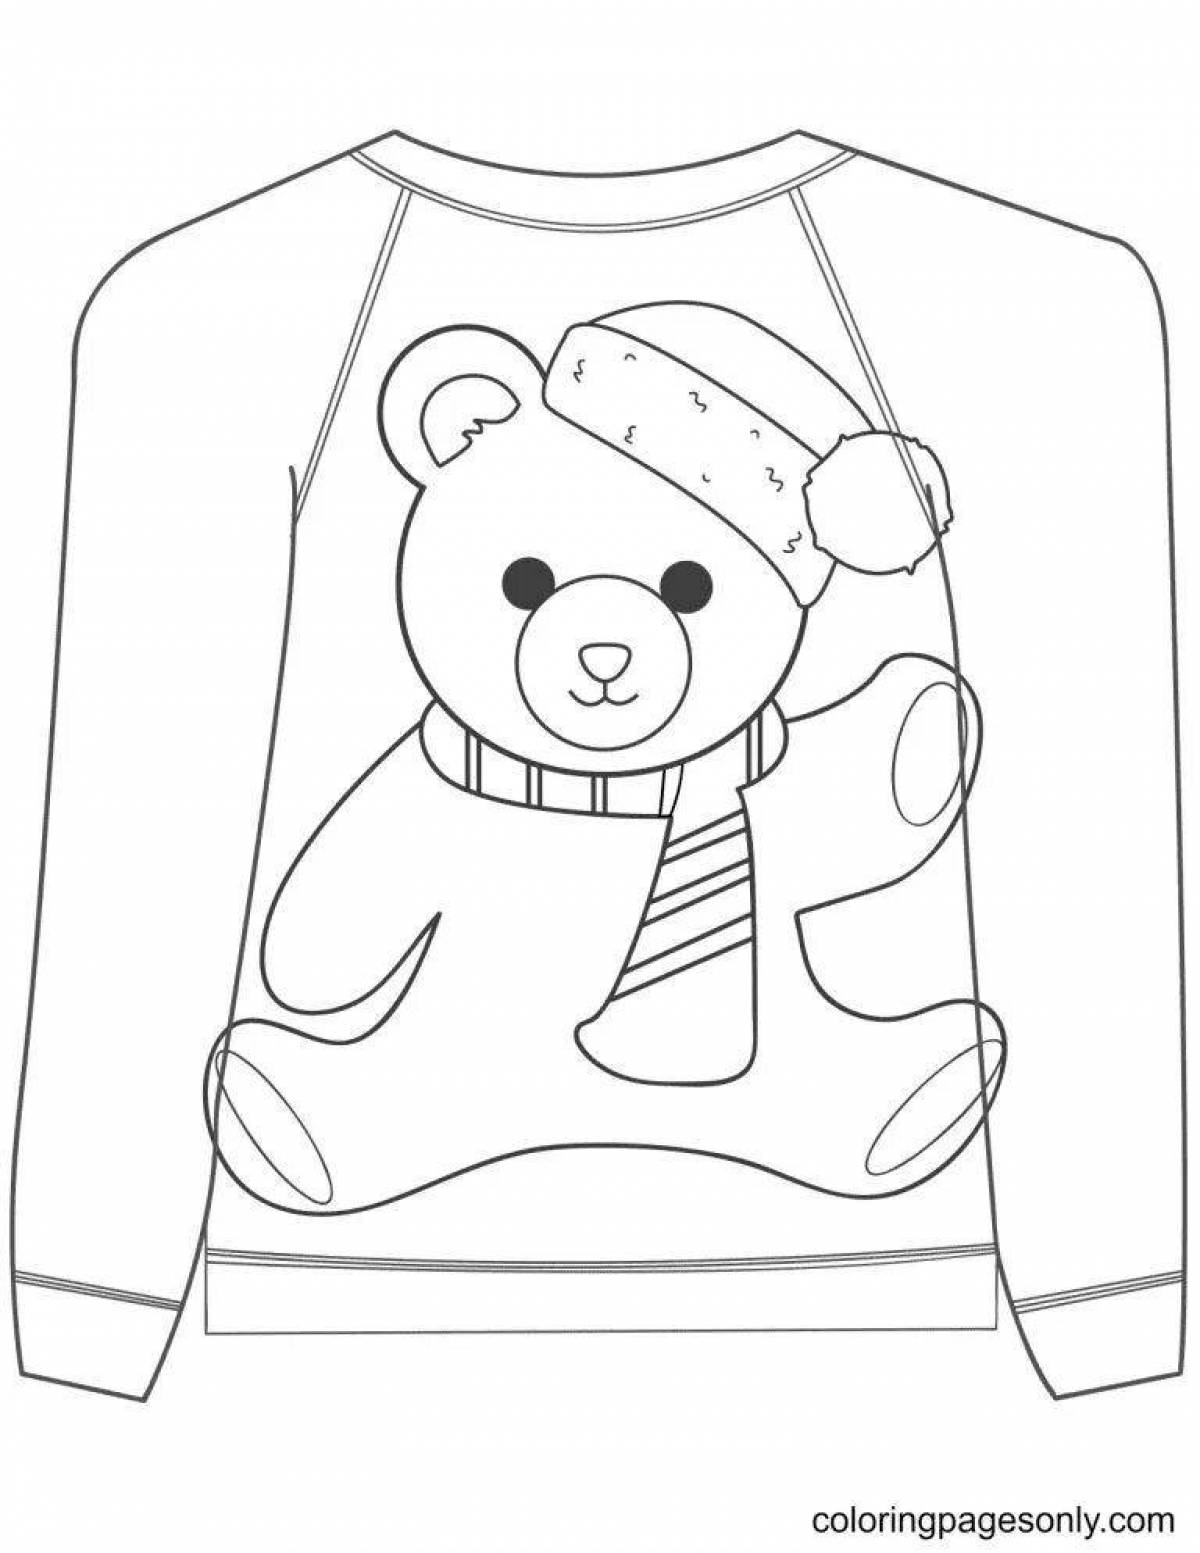 Incredible sweater coloring book for 4-5 year olds